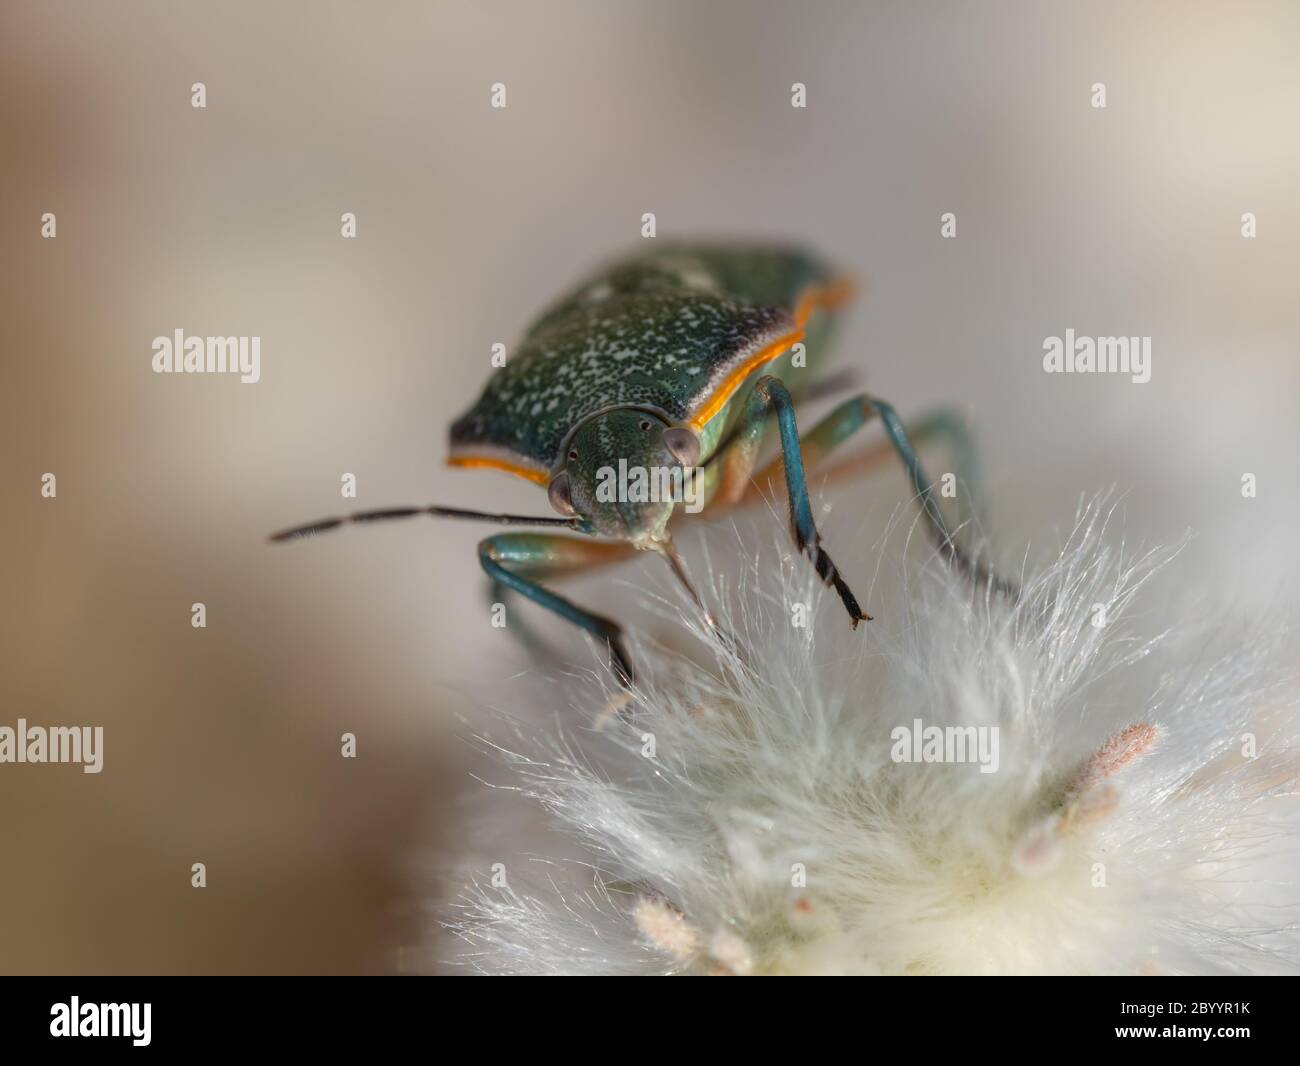 Say's green stink bug (Chlorochroa sayi) focused on the head perched on a fluffy white desert plant Stock Photo